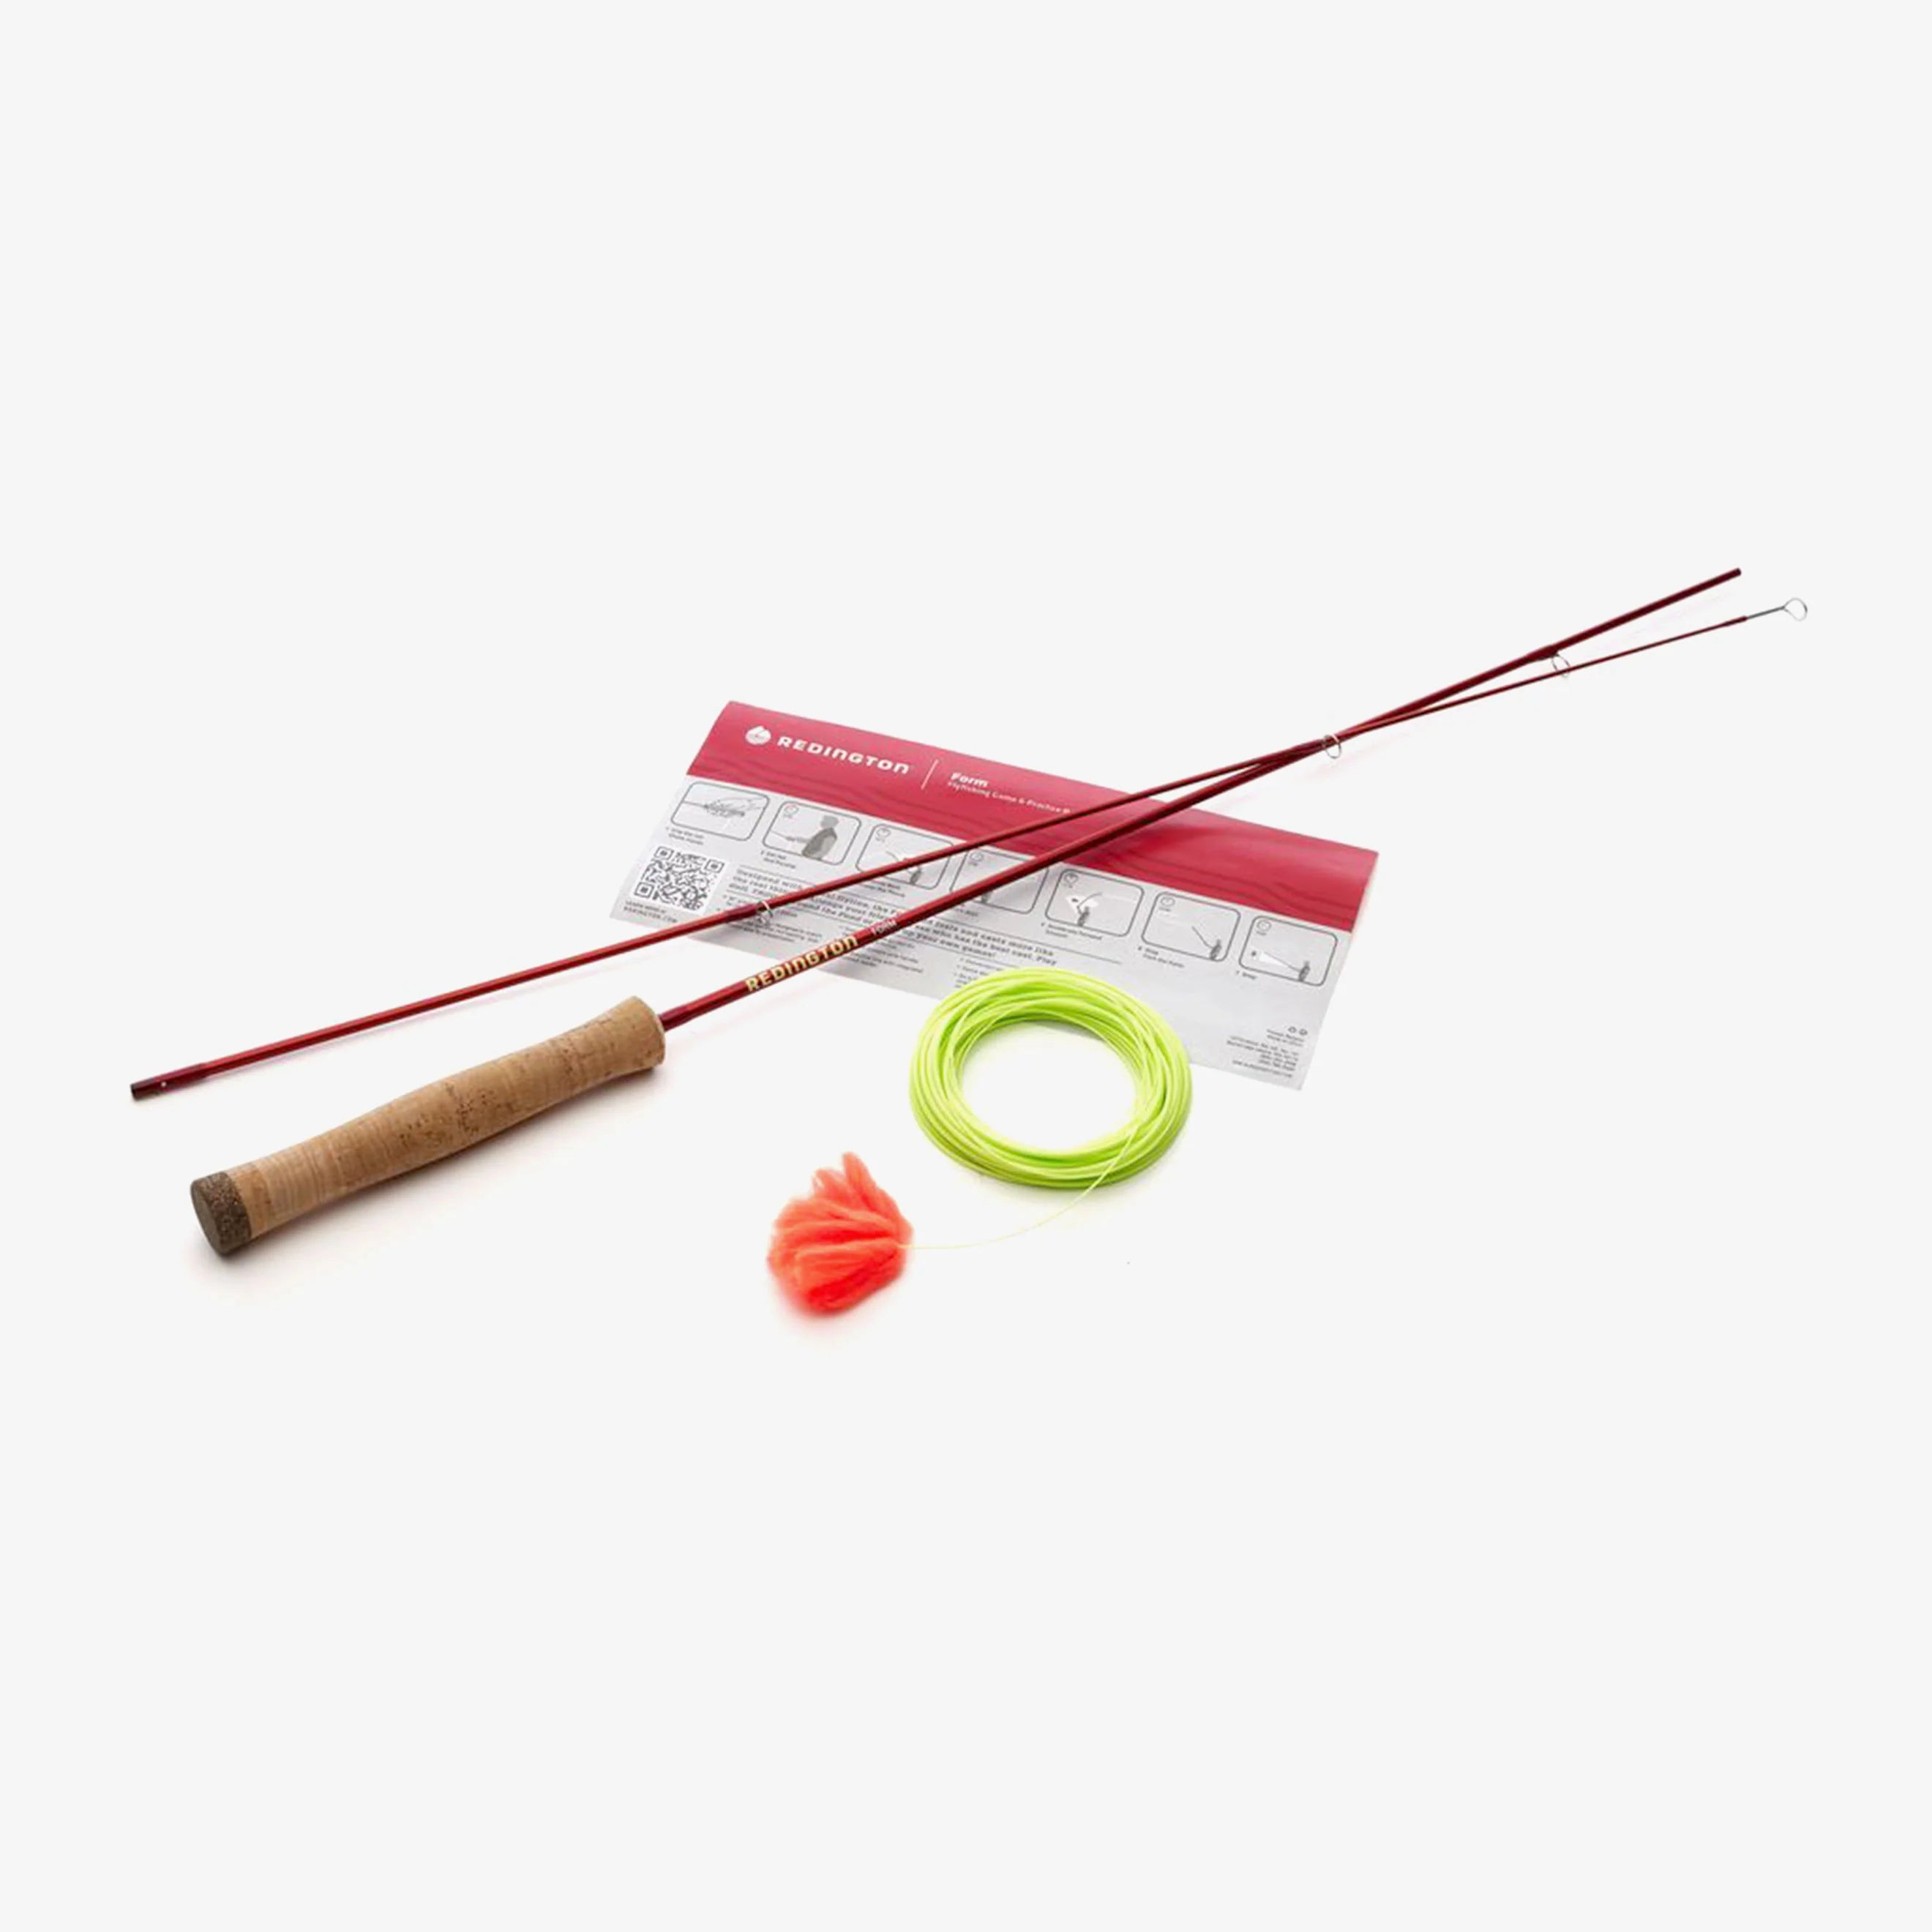 Redington Fly Fishing Accessories for sale